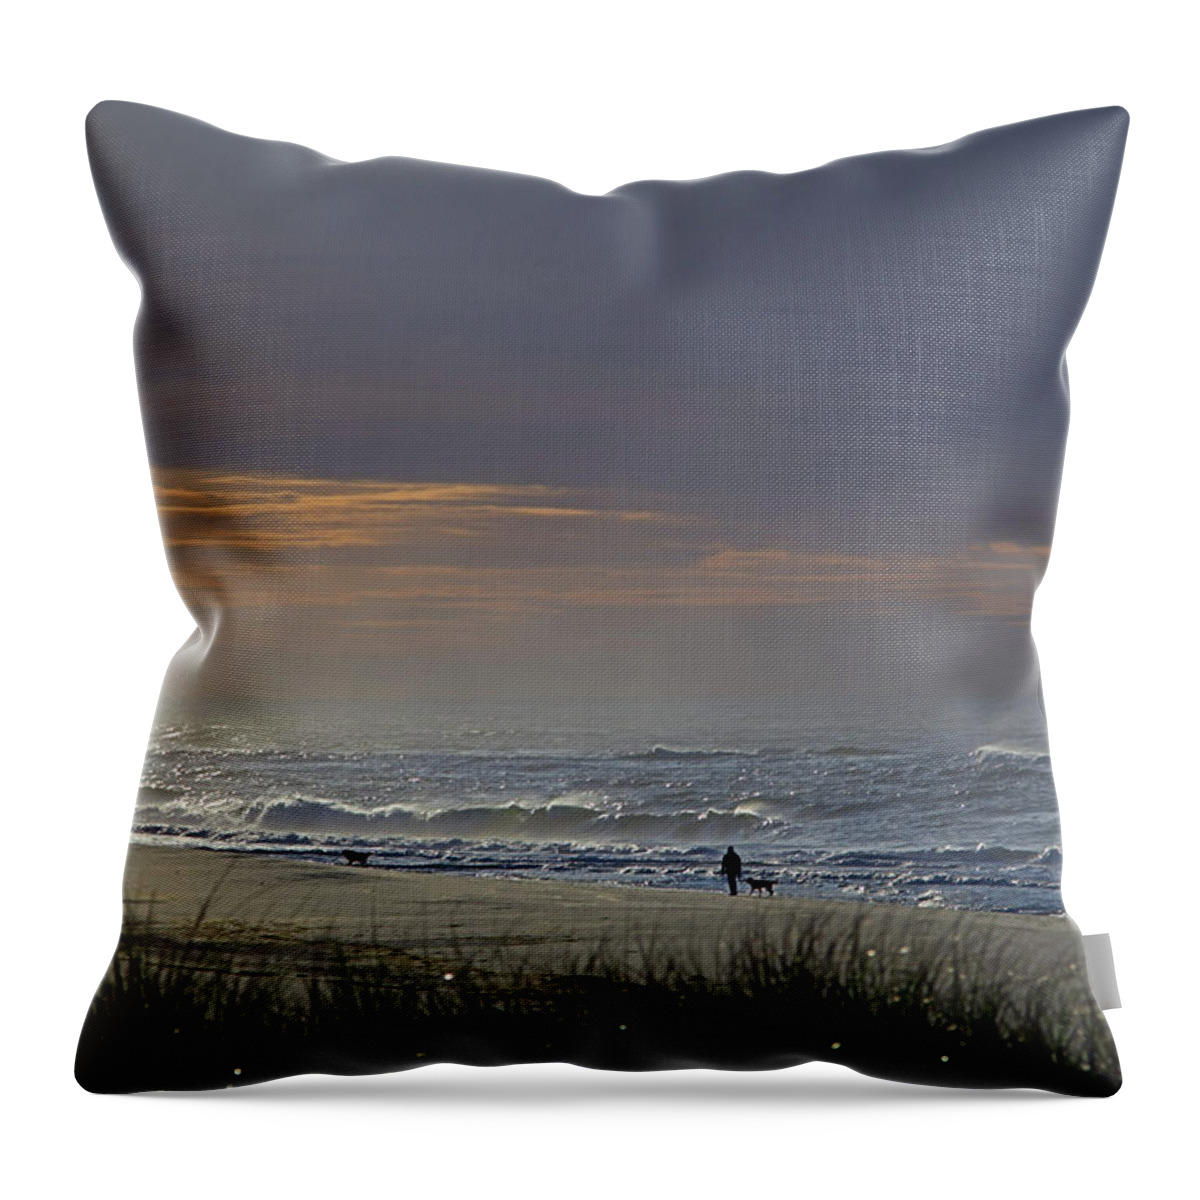  Throw Pillow featuring the photograph Stroll I I I by Newwwman